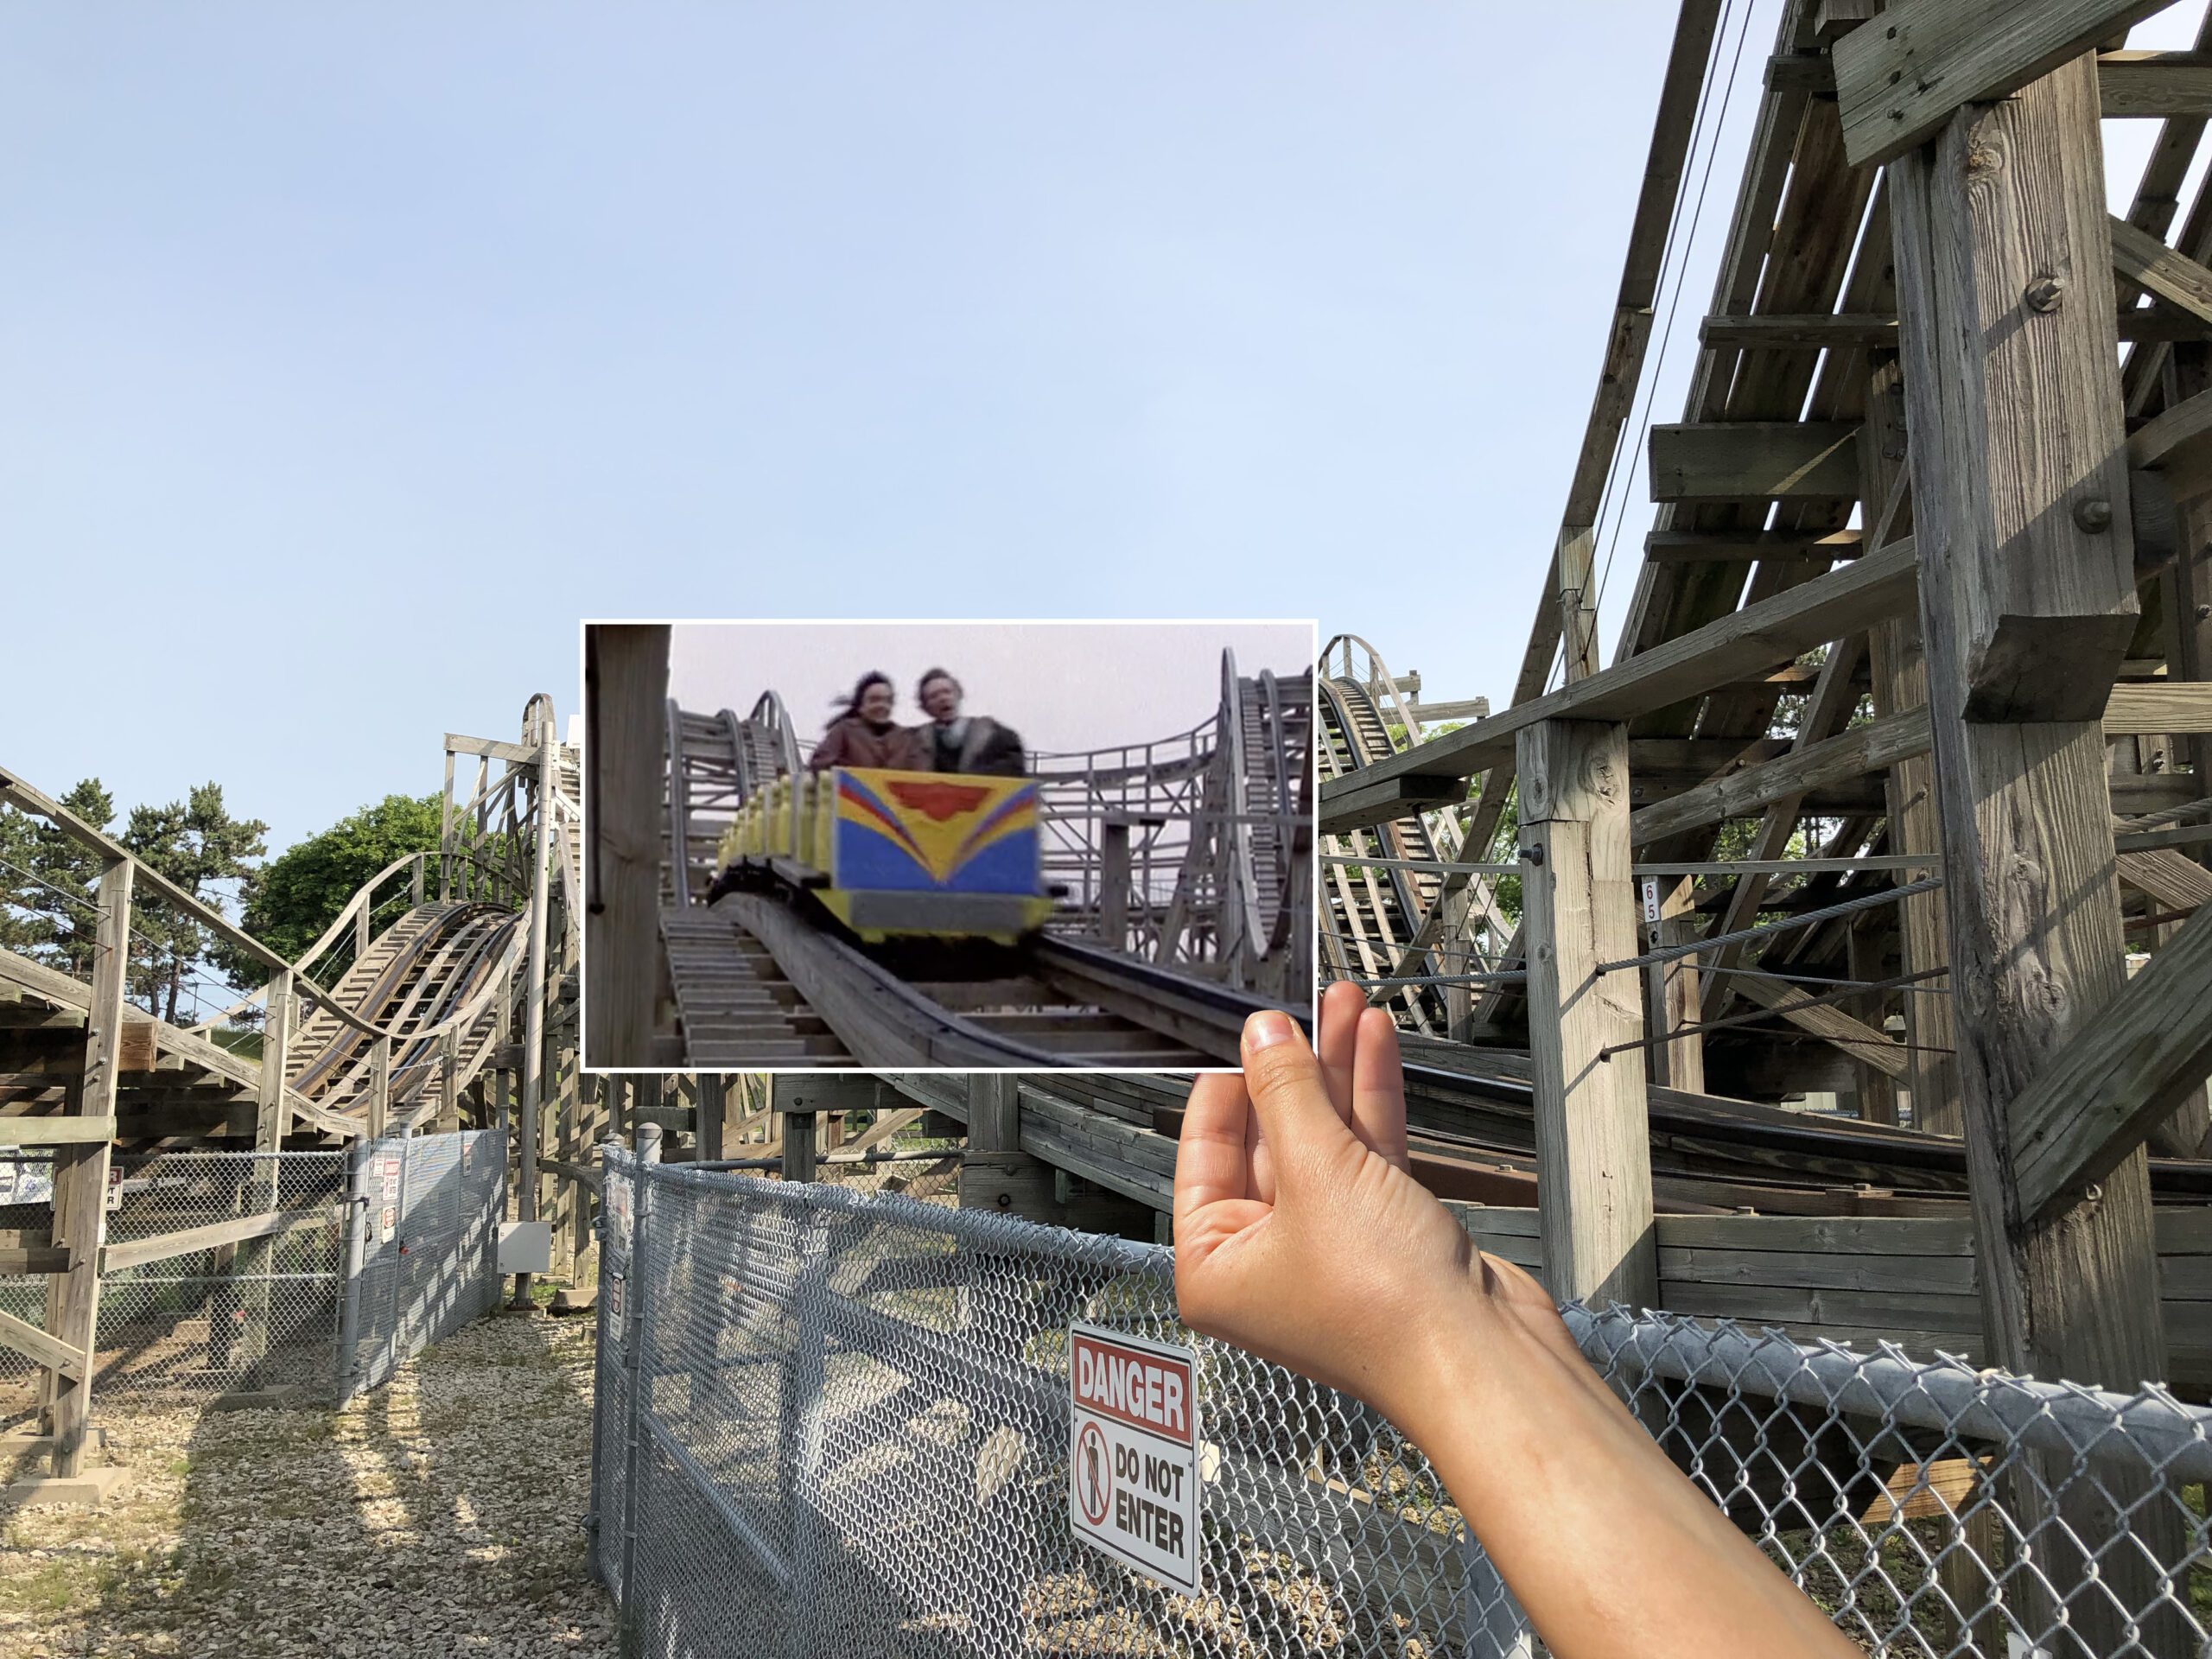 A hand holding up a photograph which contains a still from The Dead Zone, perfectly matching the background of where the footage was shot.